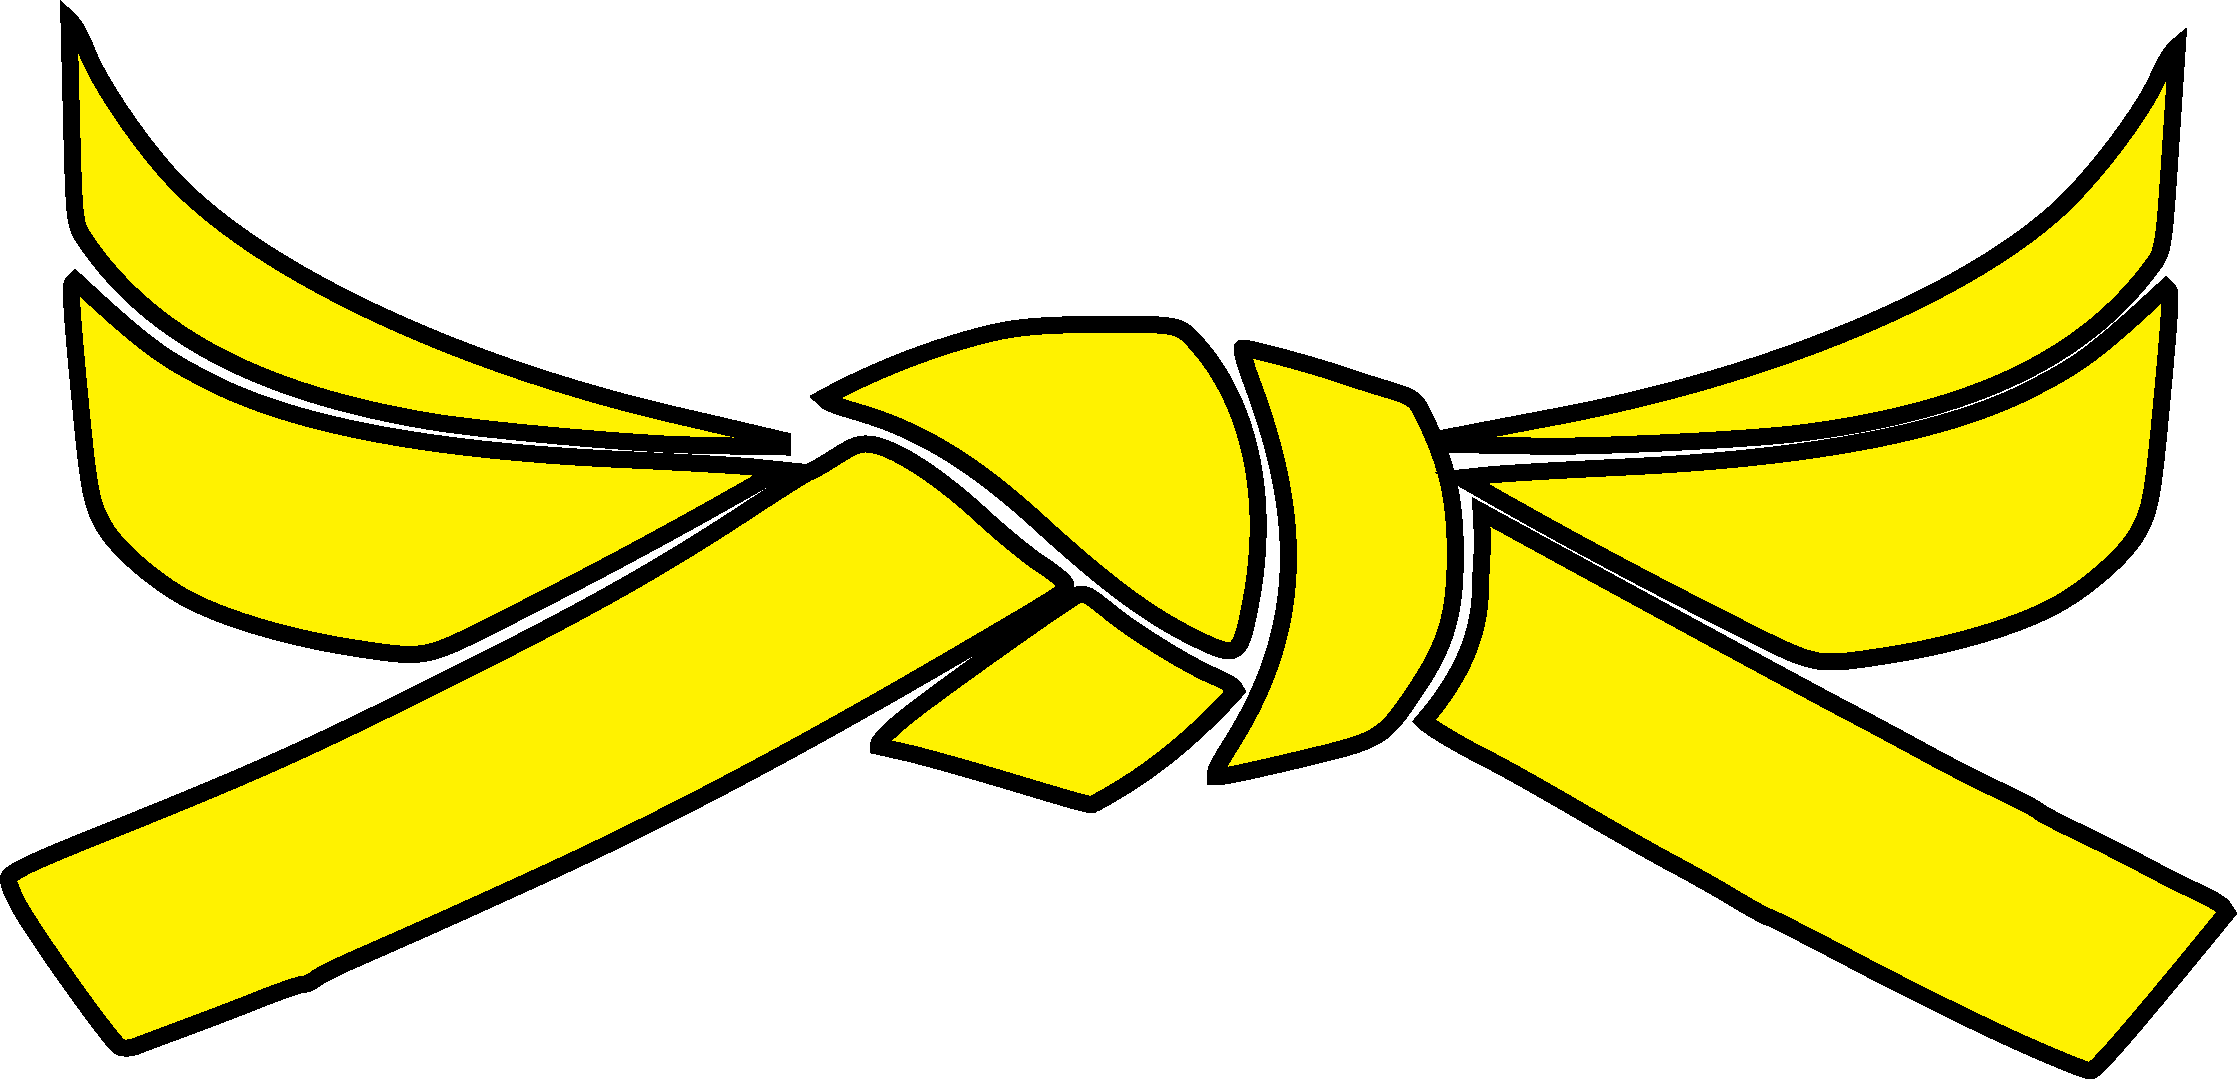 A Yellow Ribbon On A Black Background